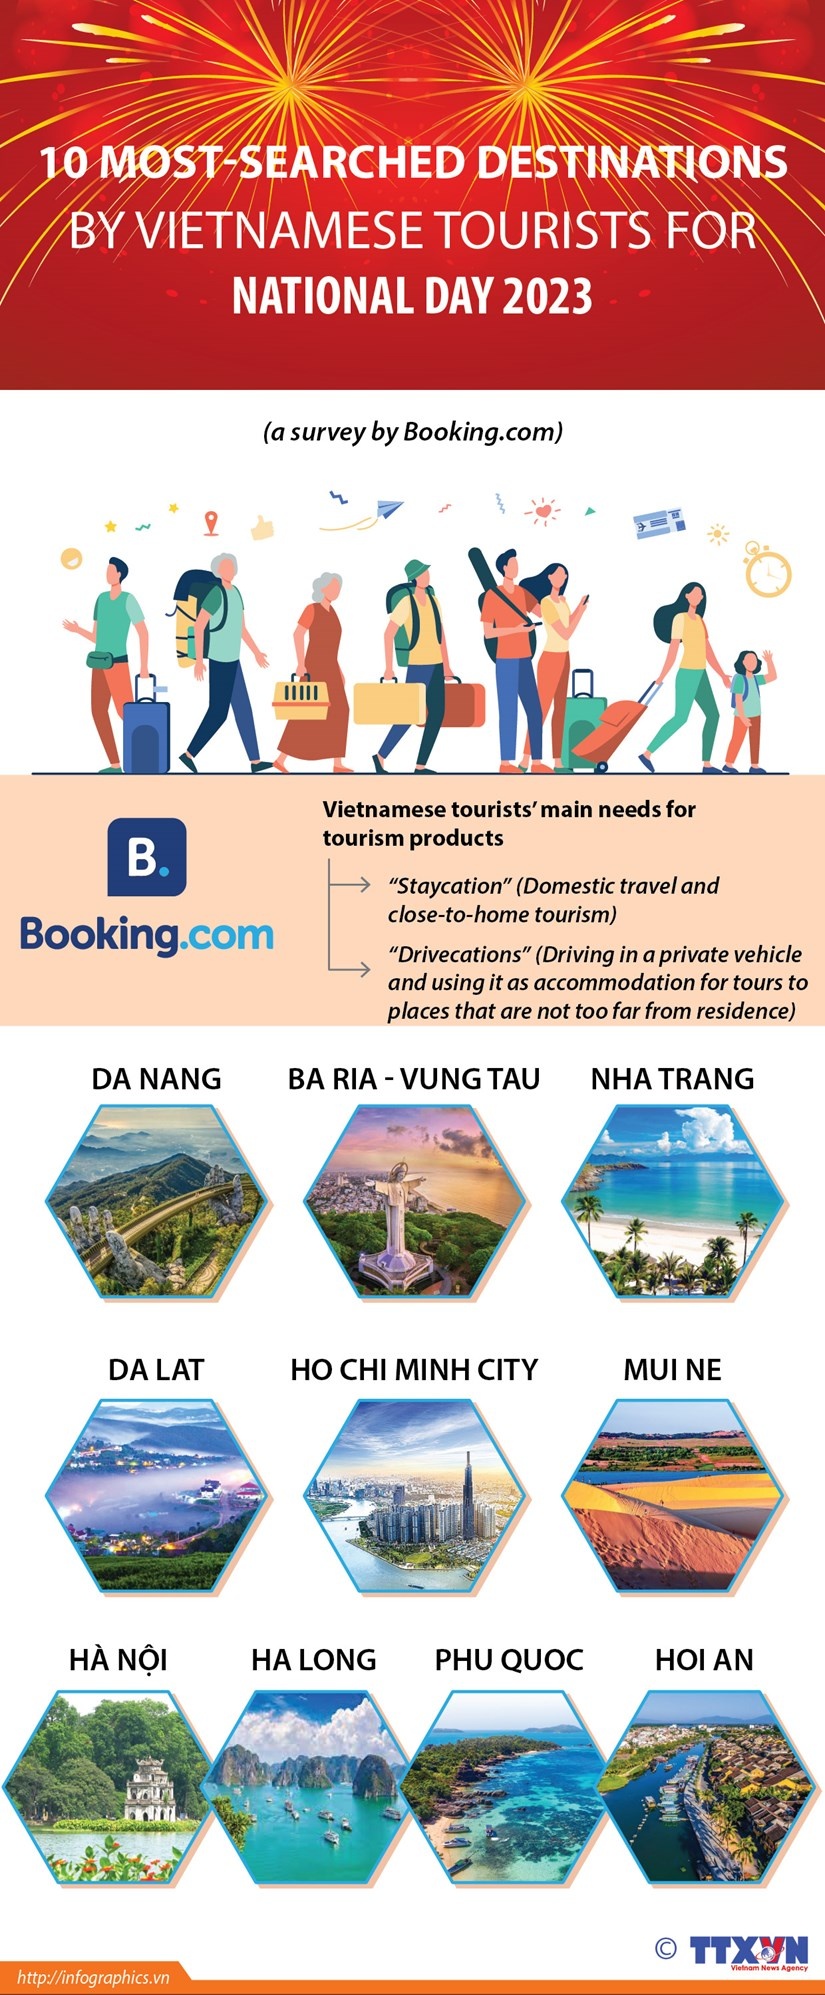 10 most-searched destinations by Vietnamese tourists for National Day 2023